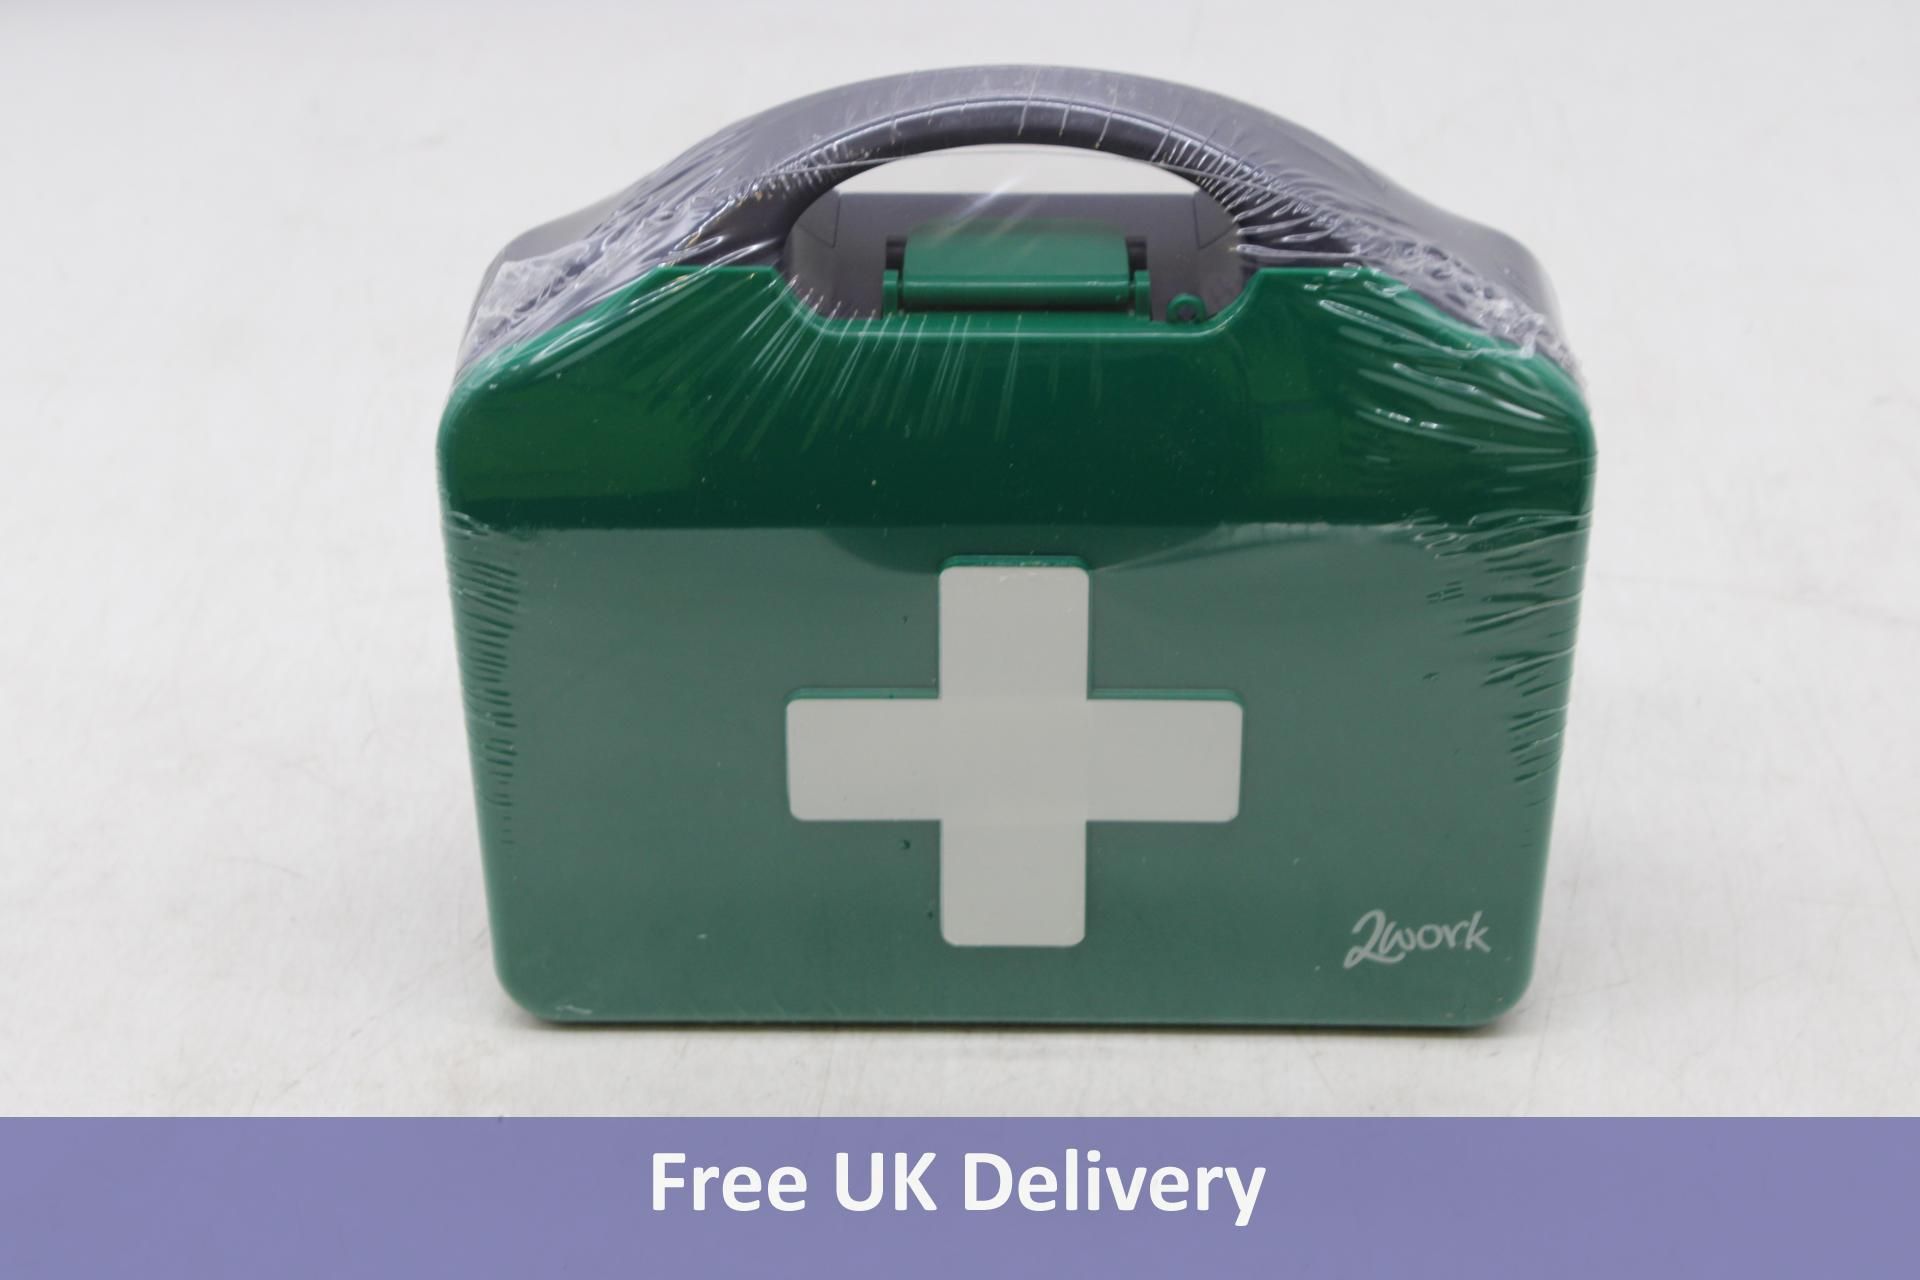 Three Cases of Bs8599-1 2019 Small Workplace First Aid Kit